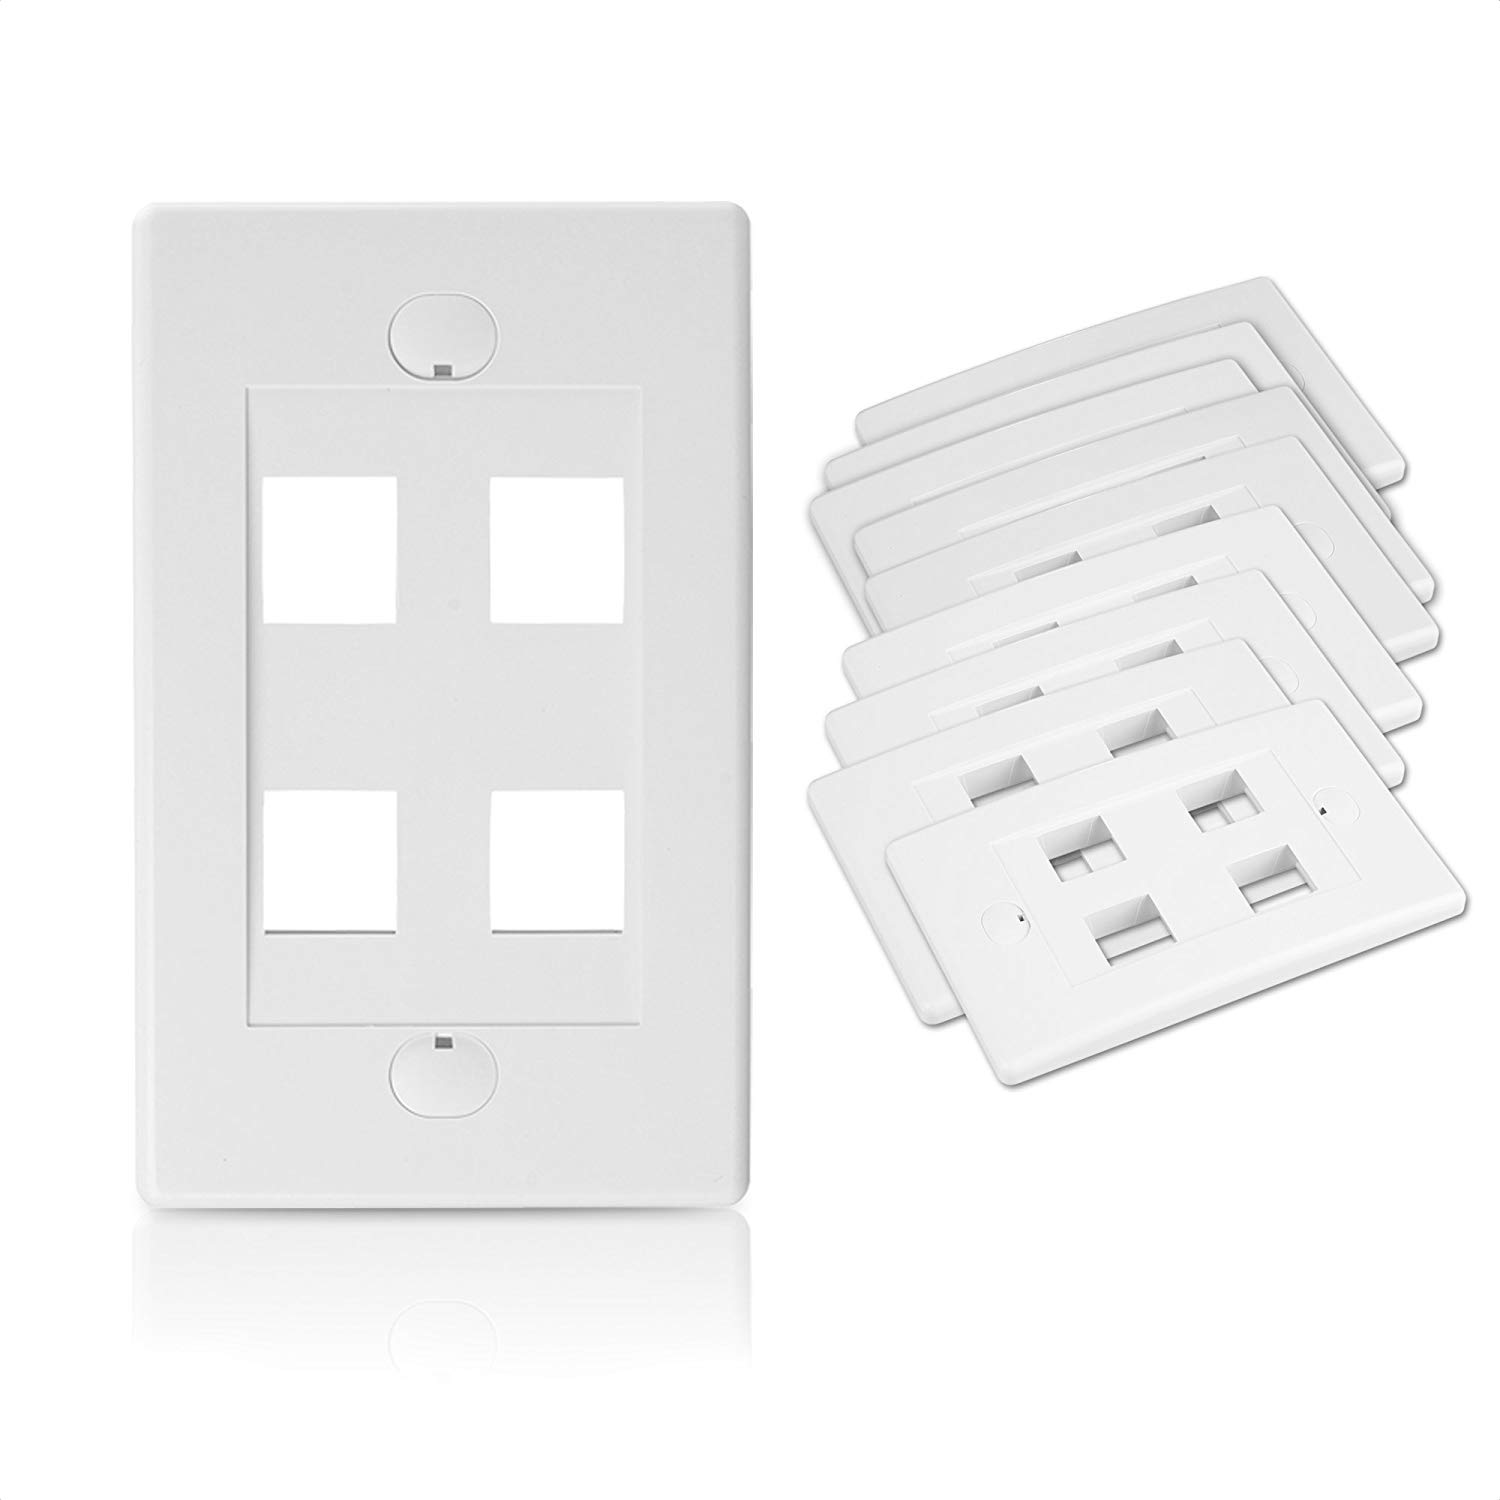 Book Cover Cable Matters UL Listed 10-Pack 4 Port Keystone Wall Plate (Cat6, Cat5e Ethernet Wall Plate) in White 4-Port